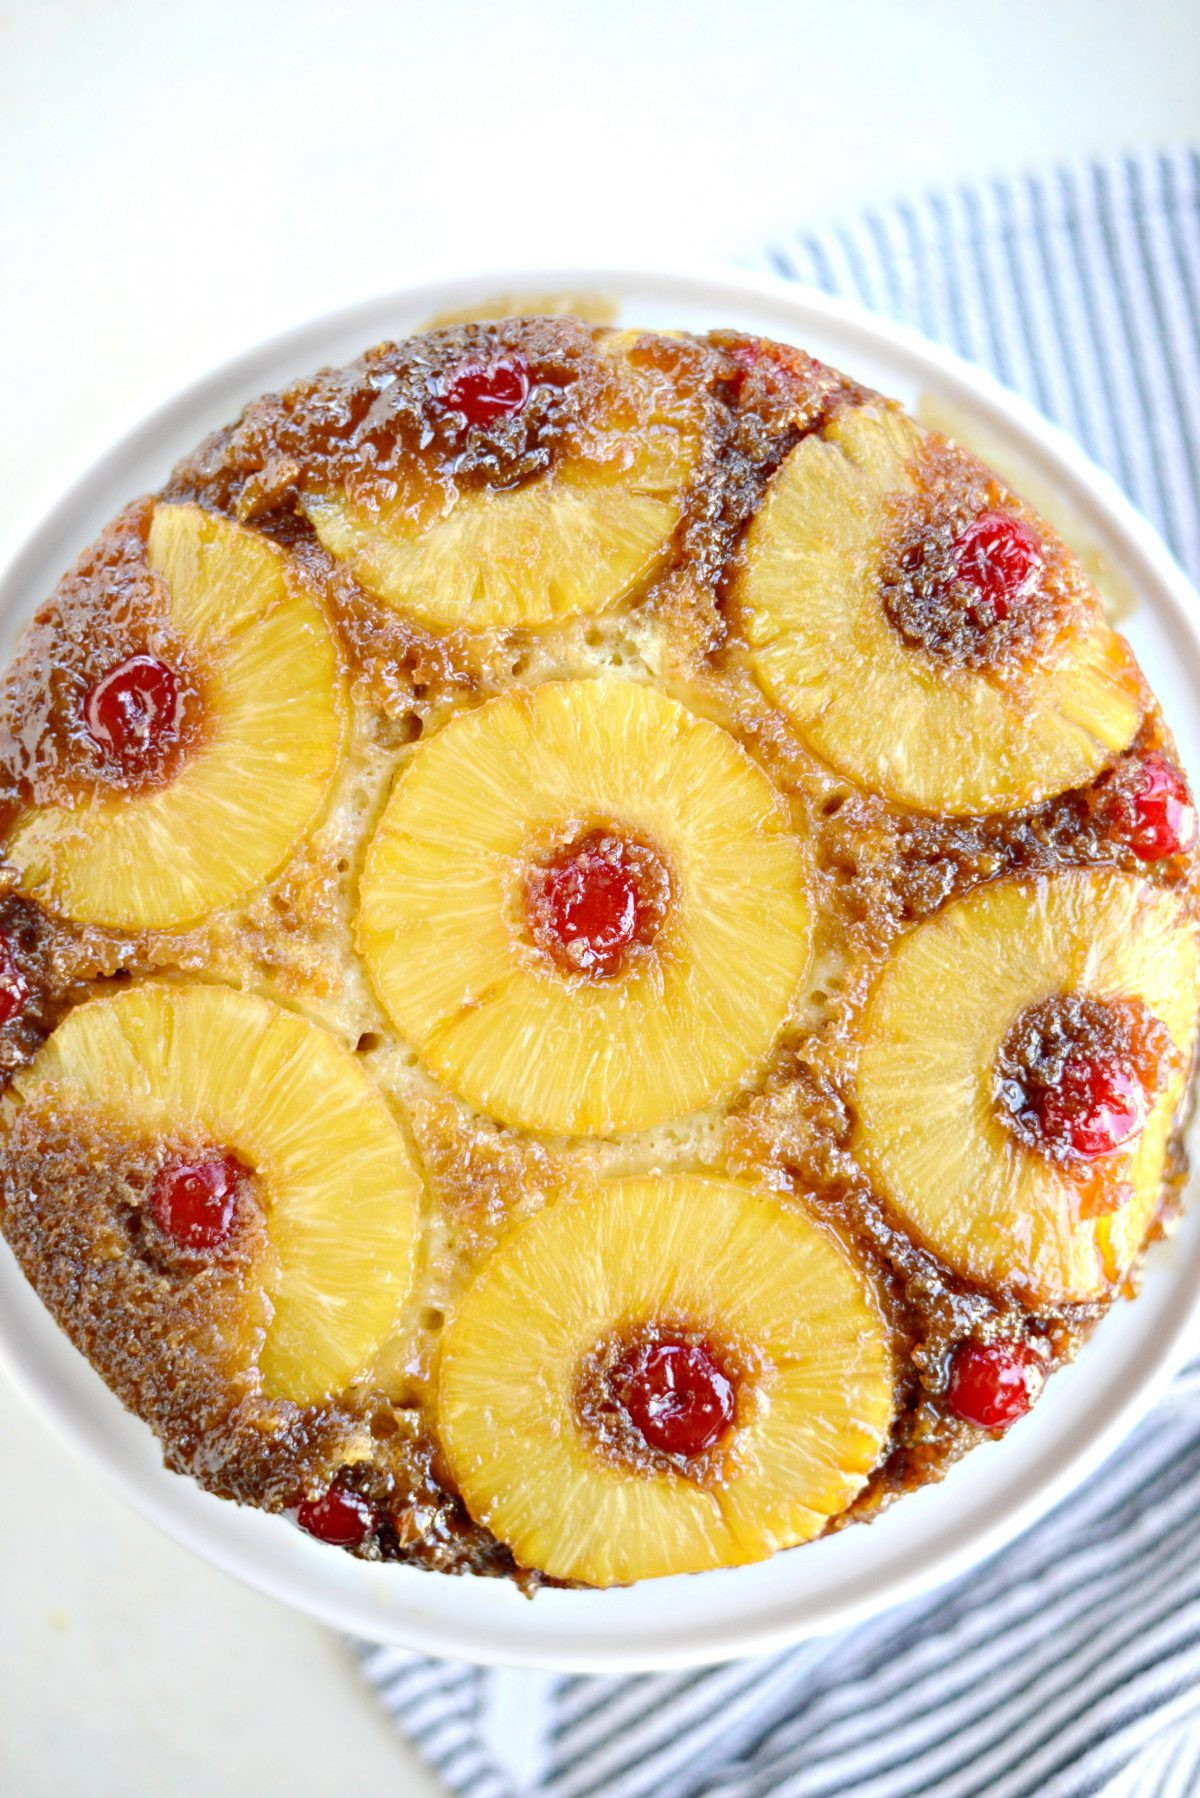 Pineapple Upside Down Cake From Scratch
 Simply Scratch Pineapple Upside Down Cake Simply Scratch